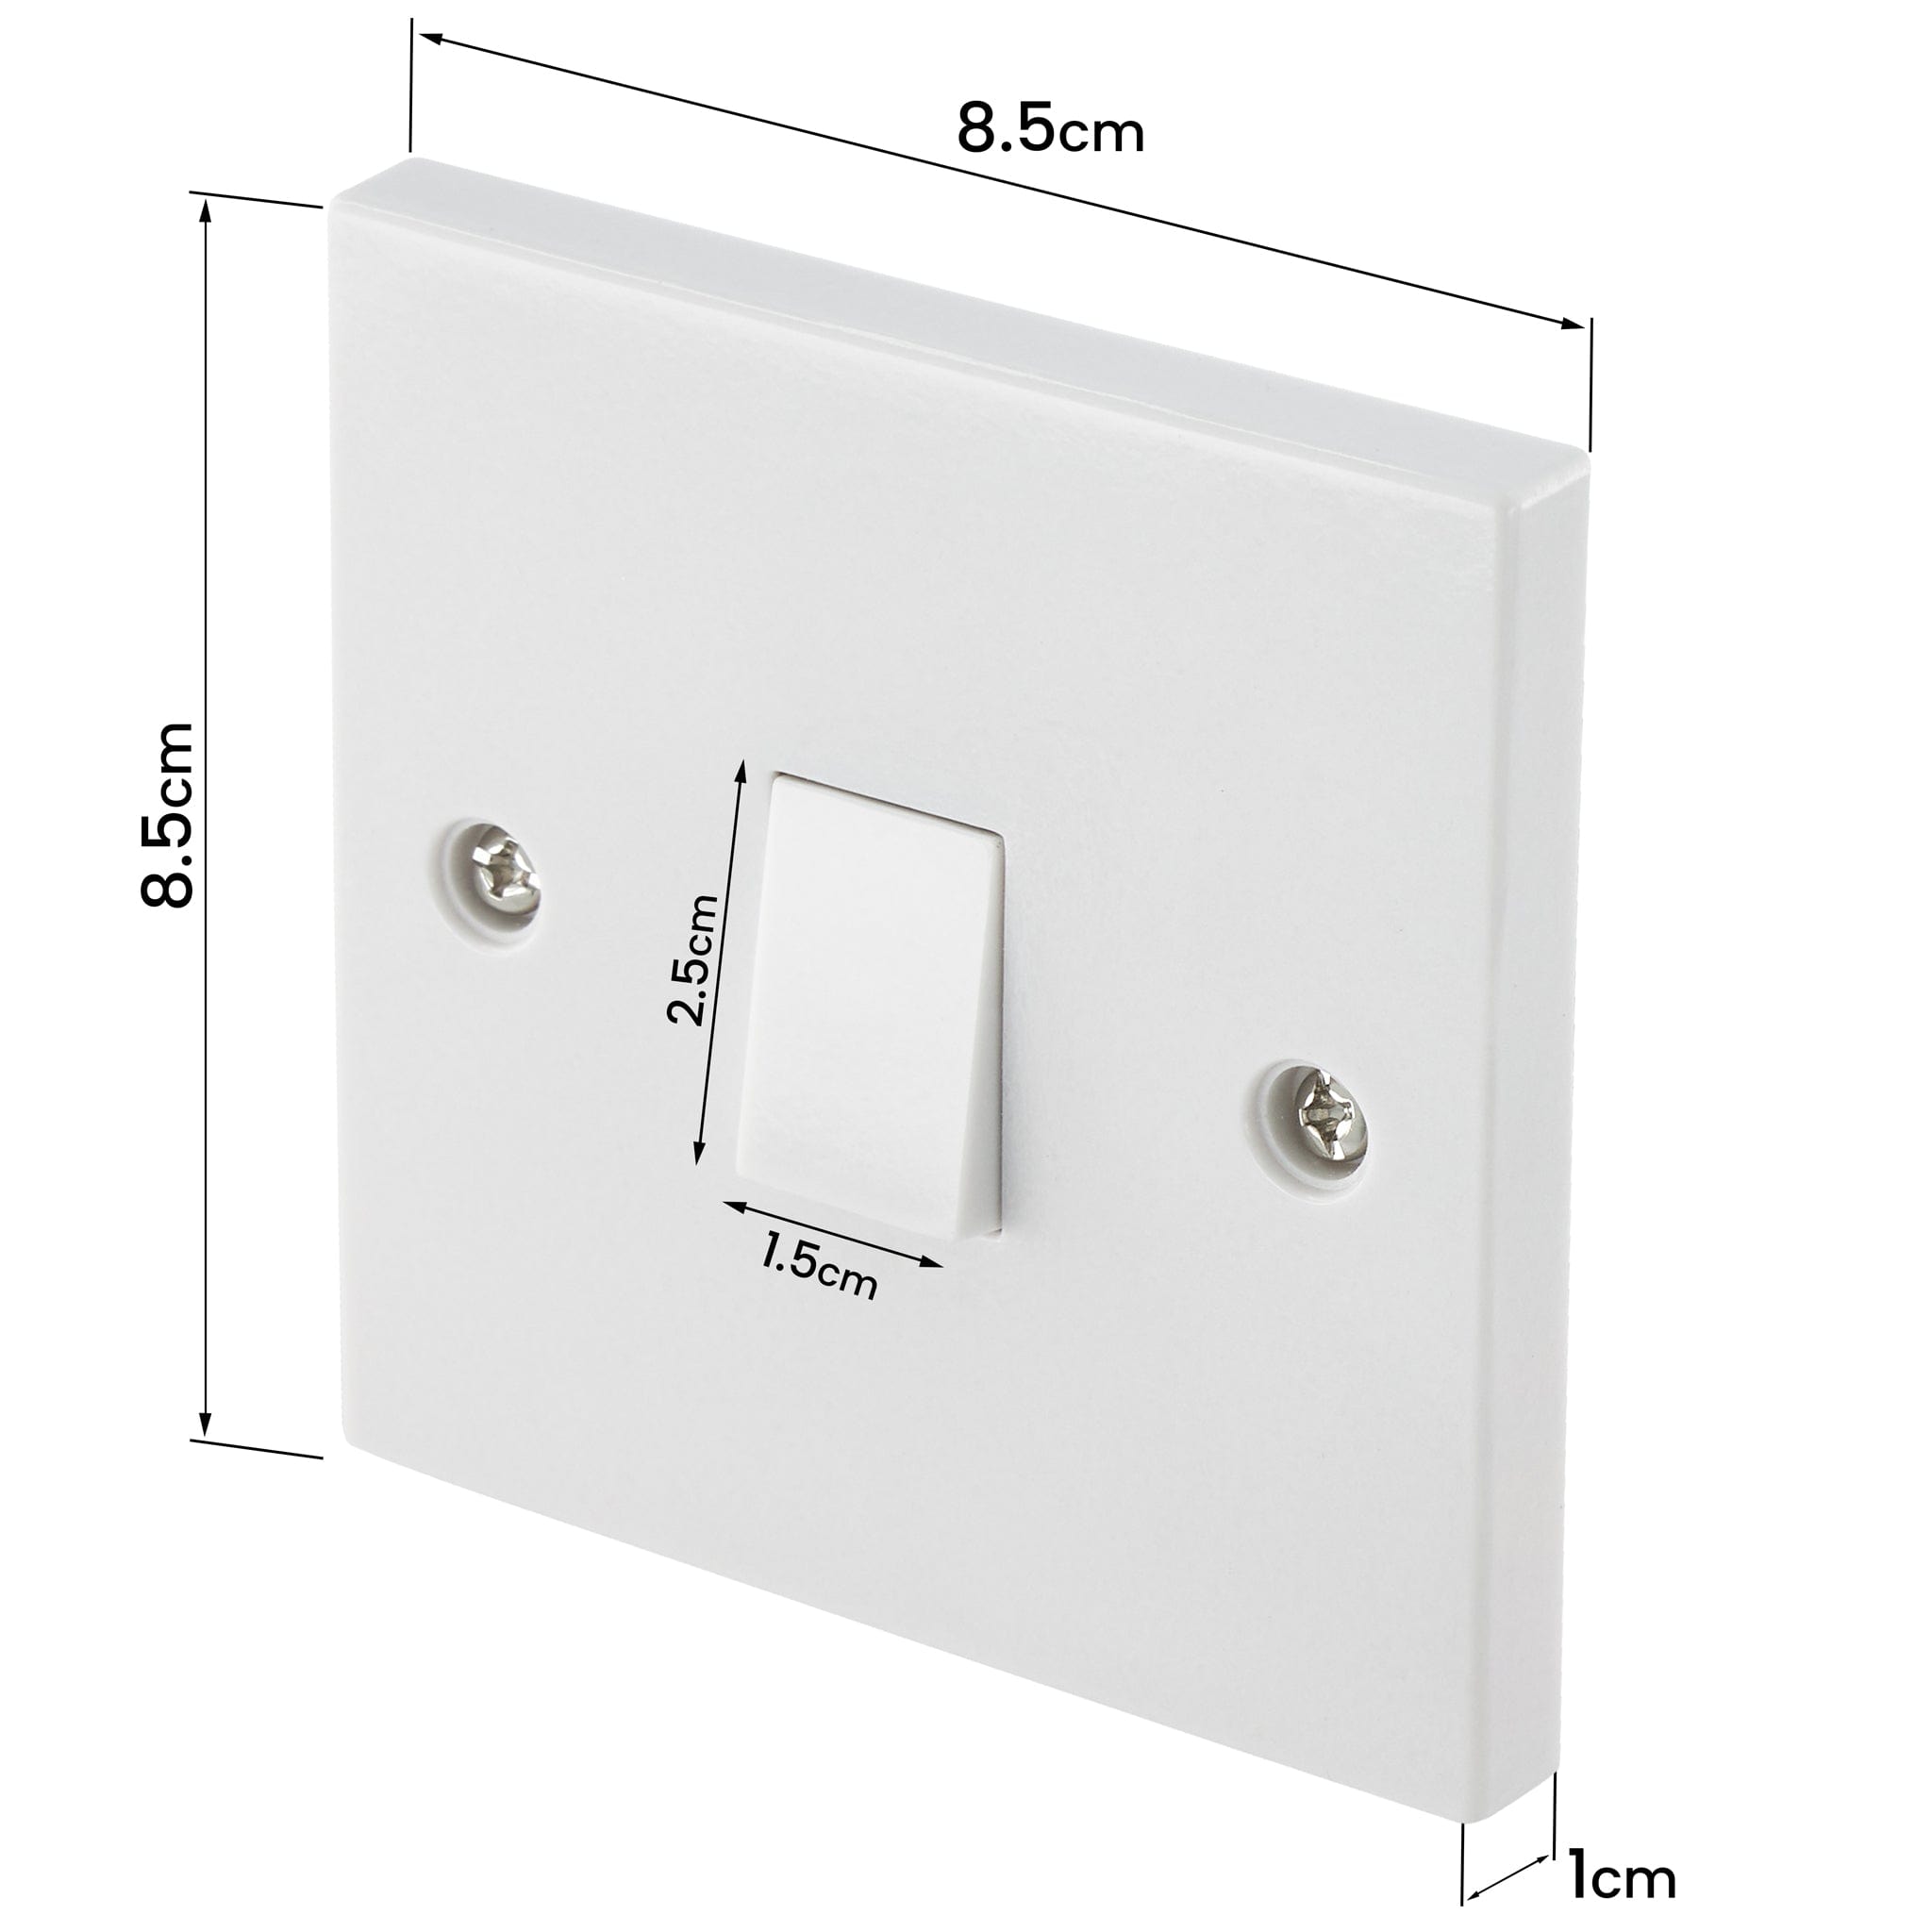 1 Gang 2 Way Light Switch 5024996706727 only5pounds-com